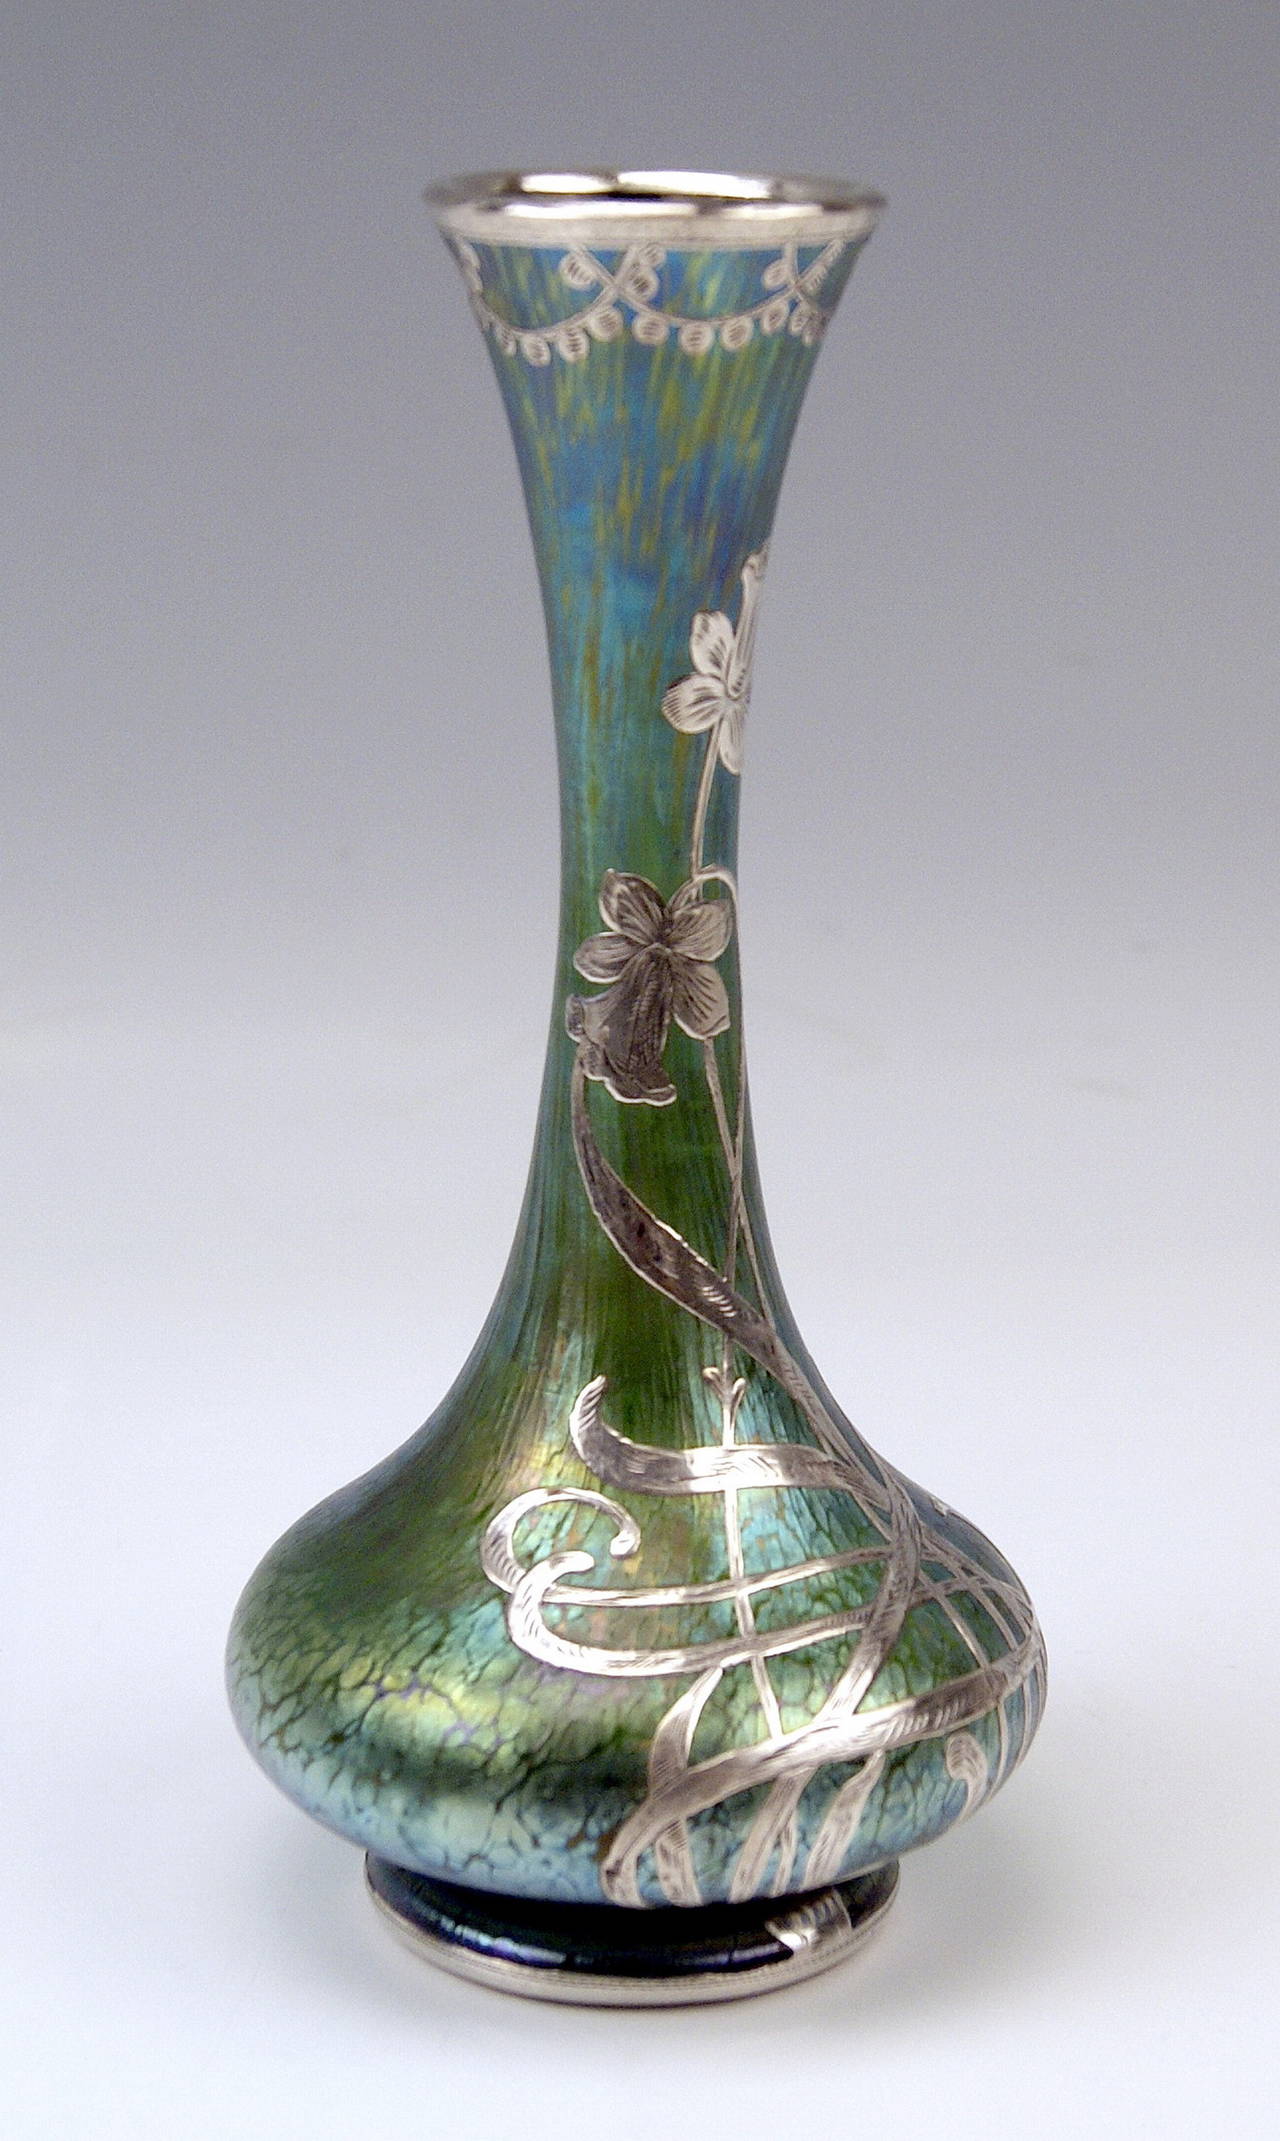 Vase Loetz Widow Klostermuehle Bohemia Art Nouveau.

Made by Loetz, Klostermuehle | circa 1900-1905.
Decor: Creta Papillon and stunning silver overlay.

This finest Loetz Art Nouveau Vase is of stalky as well as of tapering form type. The round